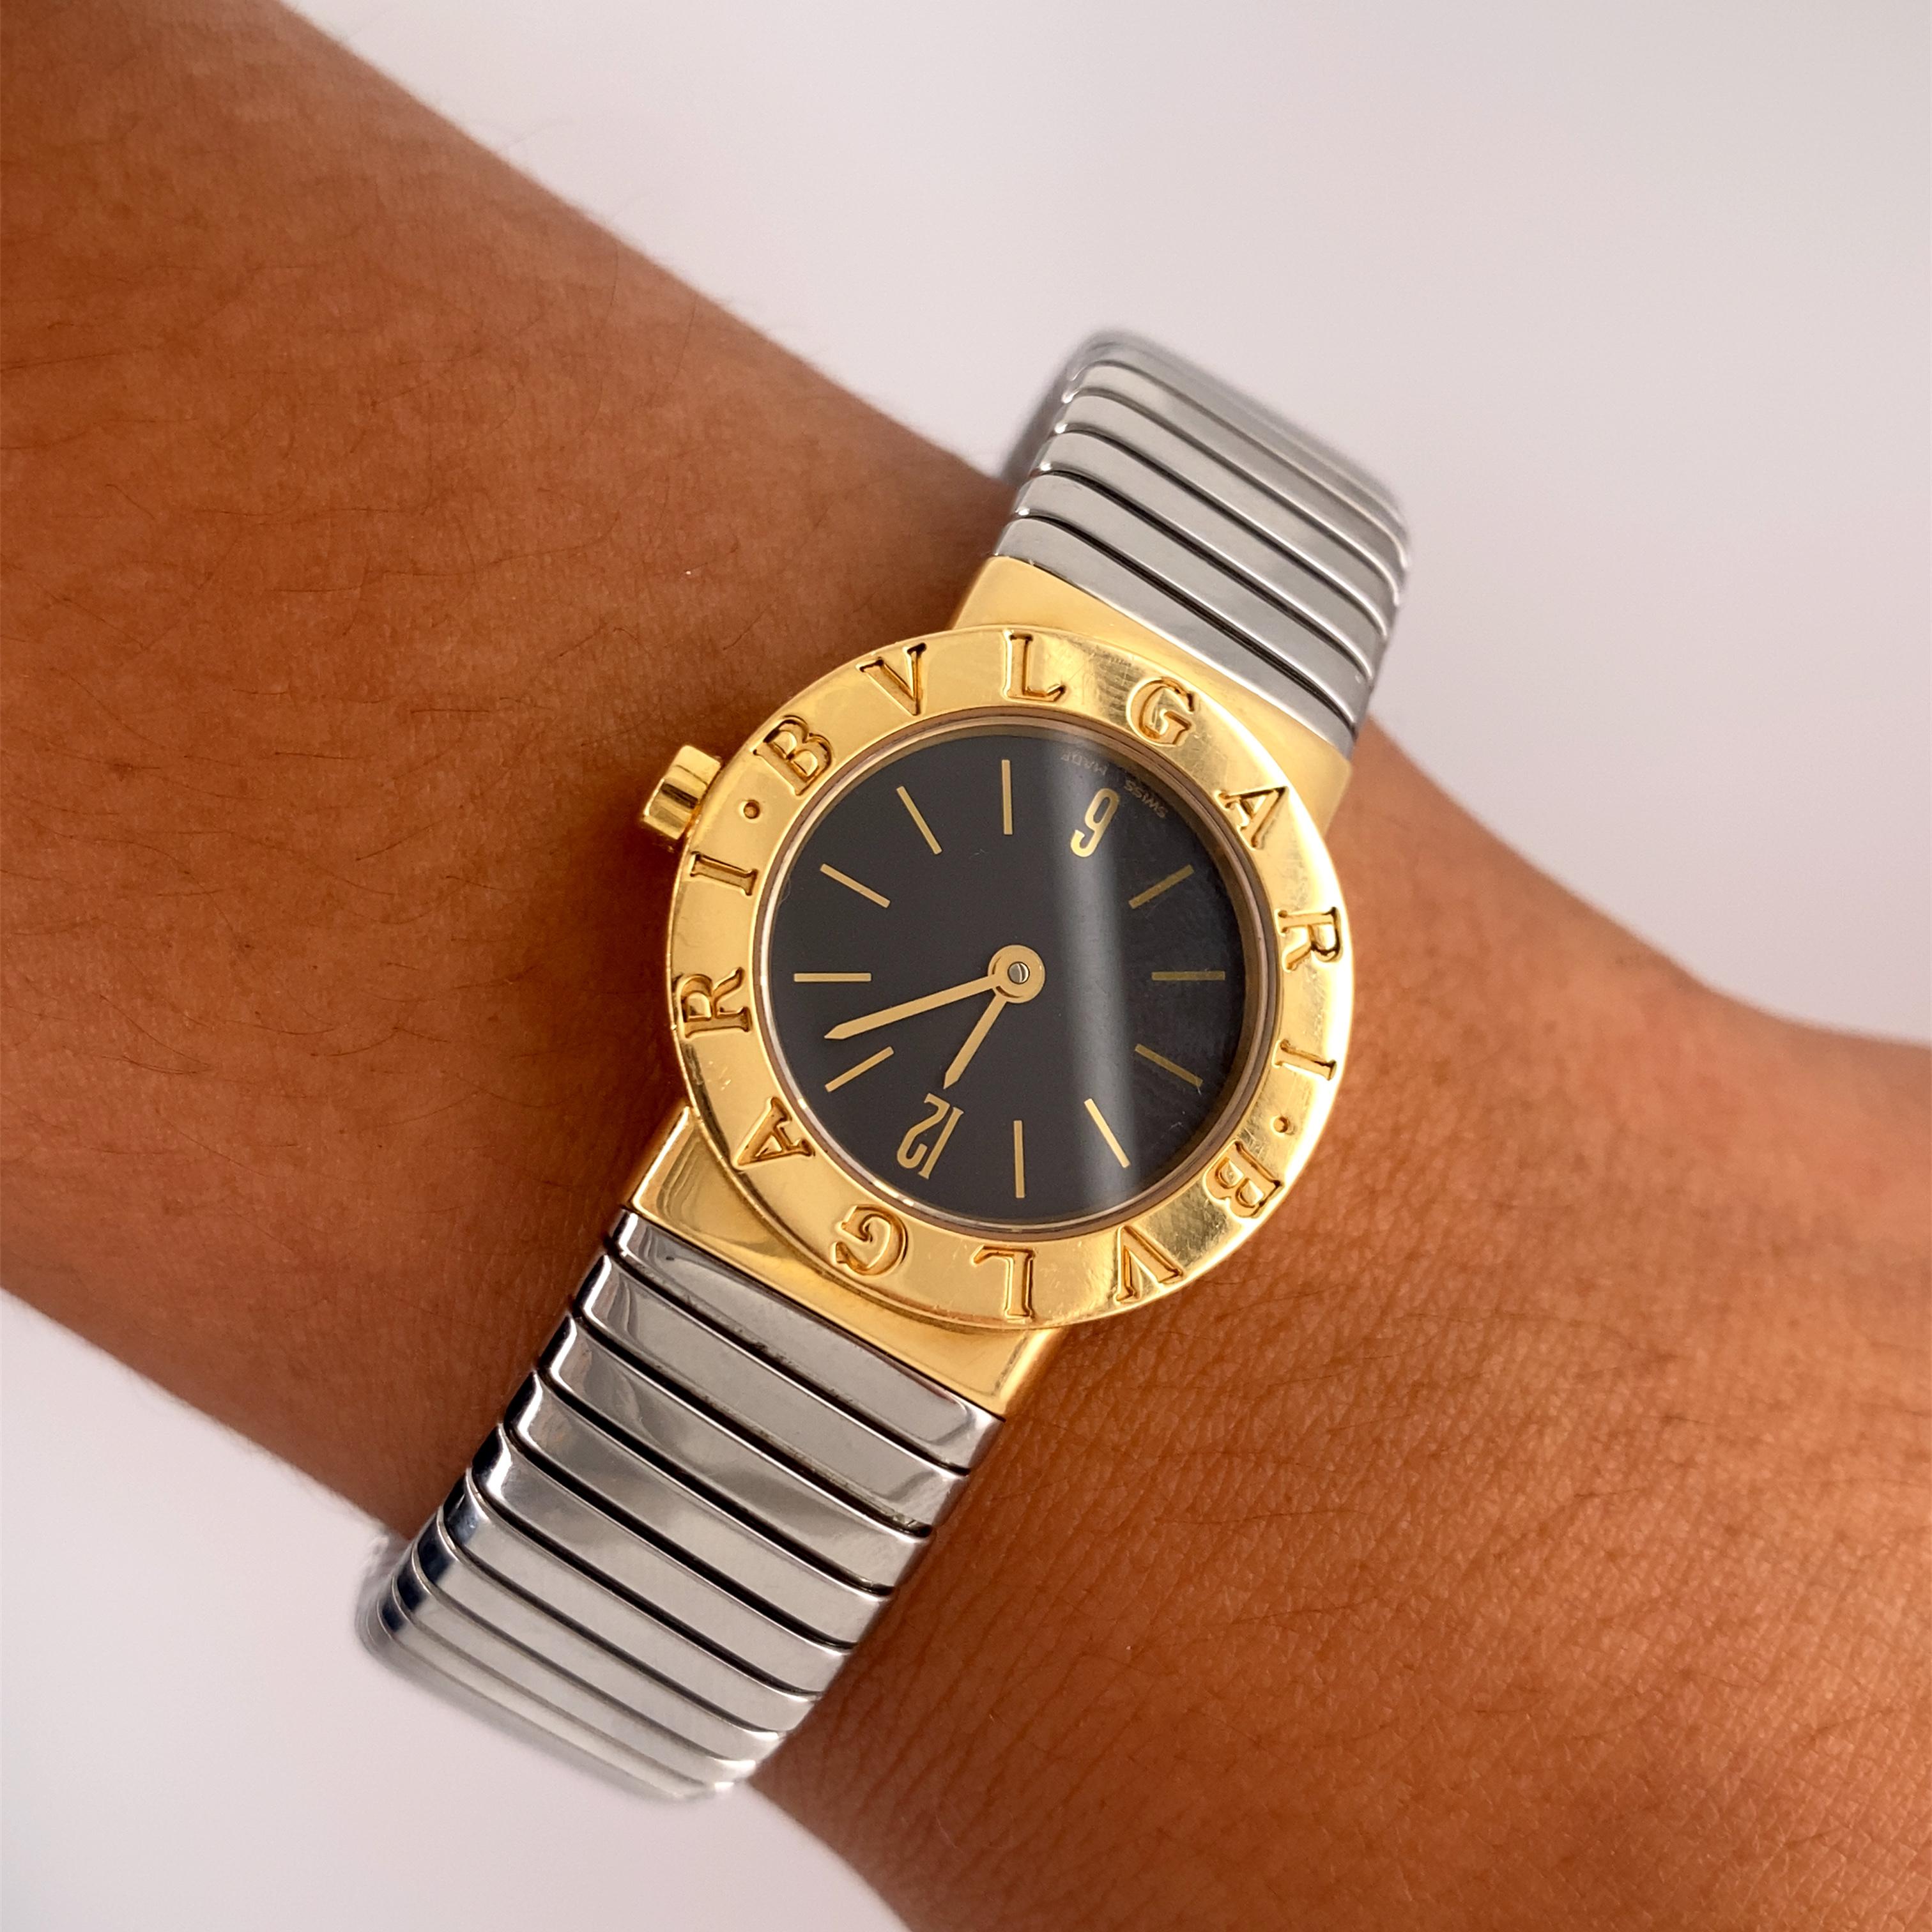 Bulgari Tubogas Watch in 18K Yellow Gold and Steel In Good Condition For Sale In New York, NY